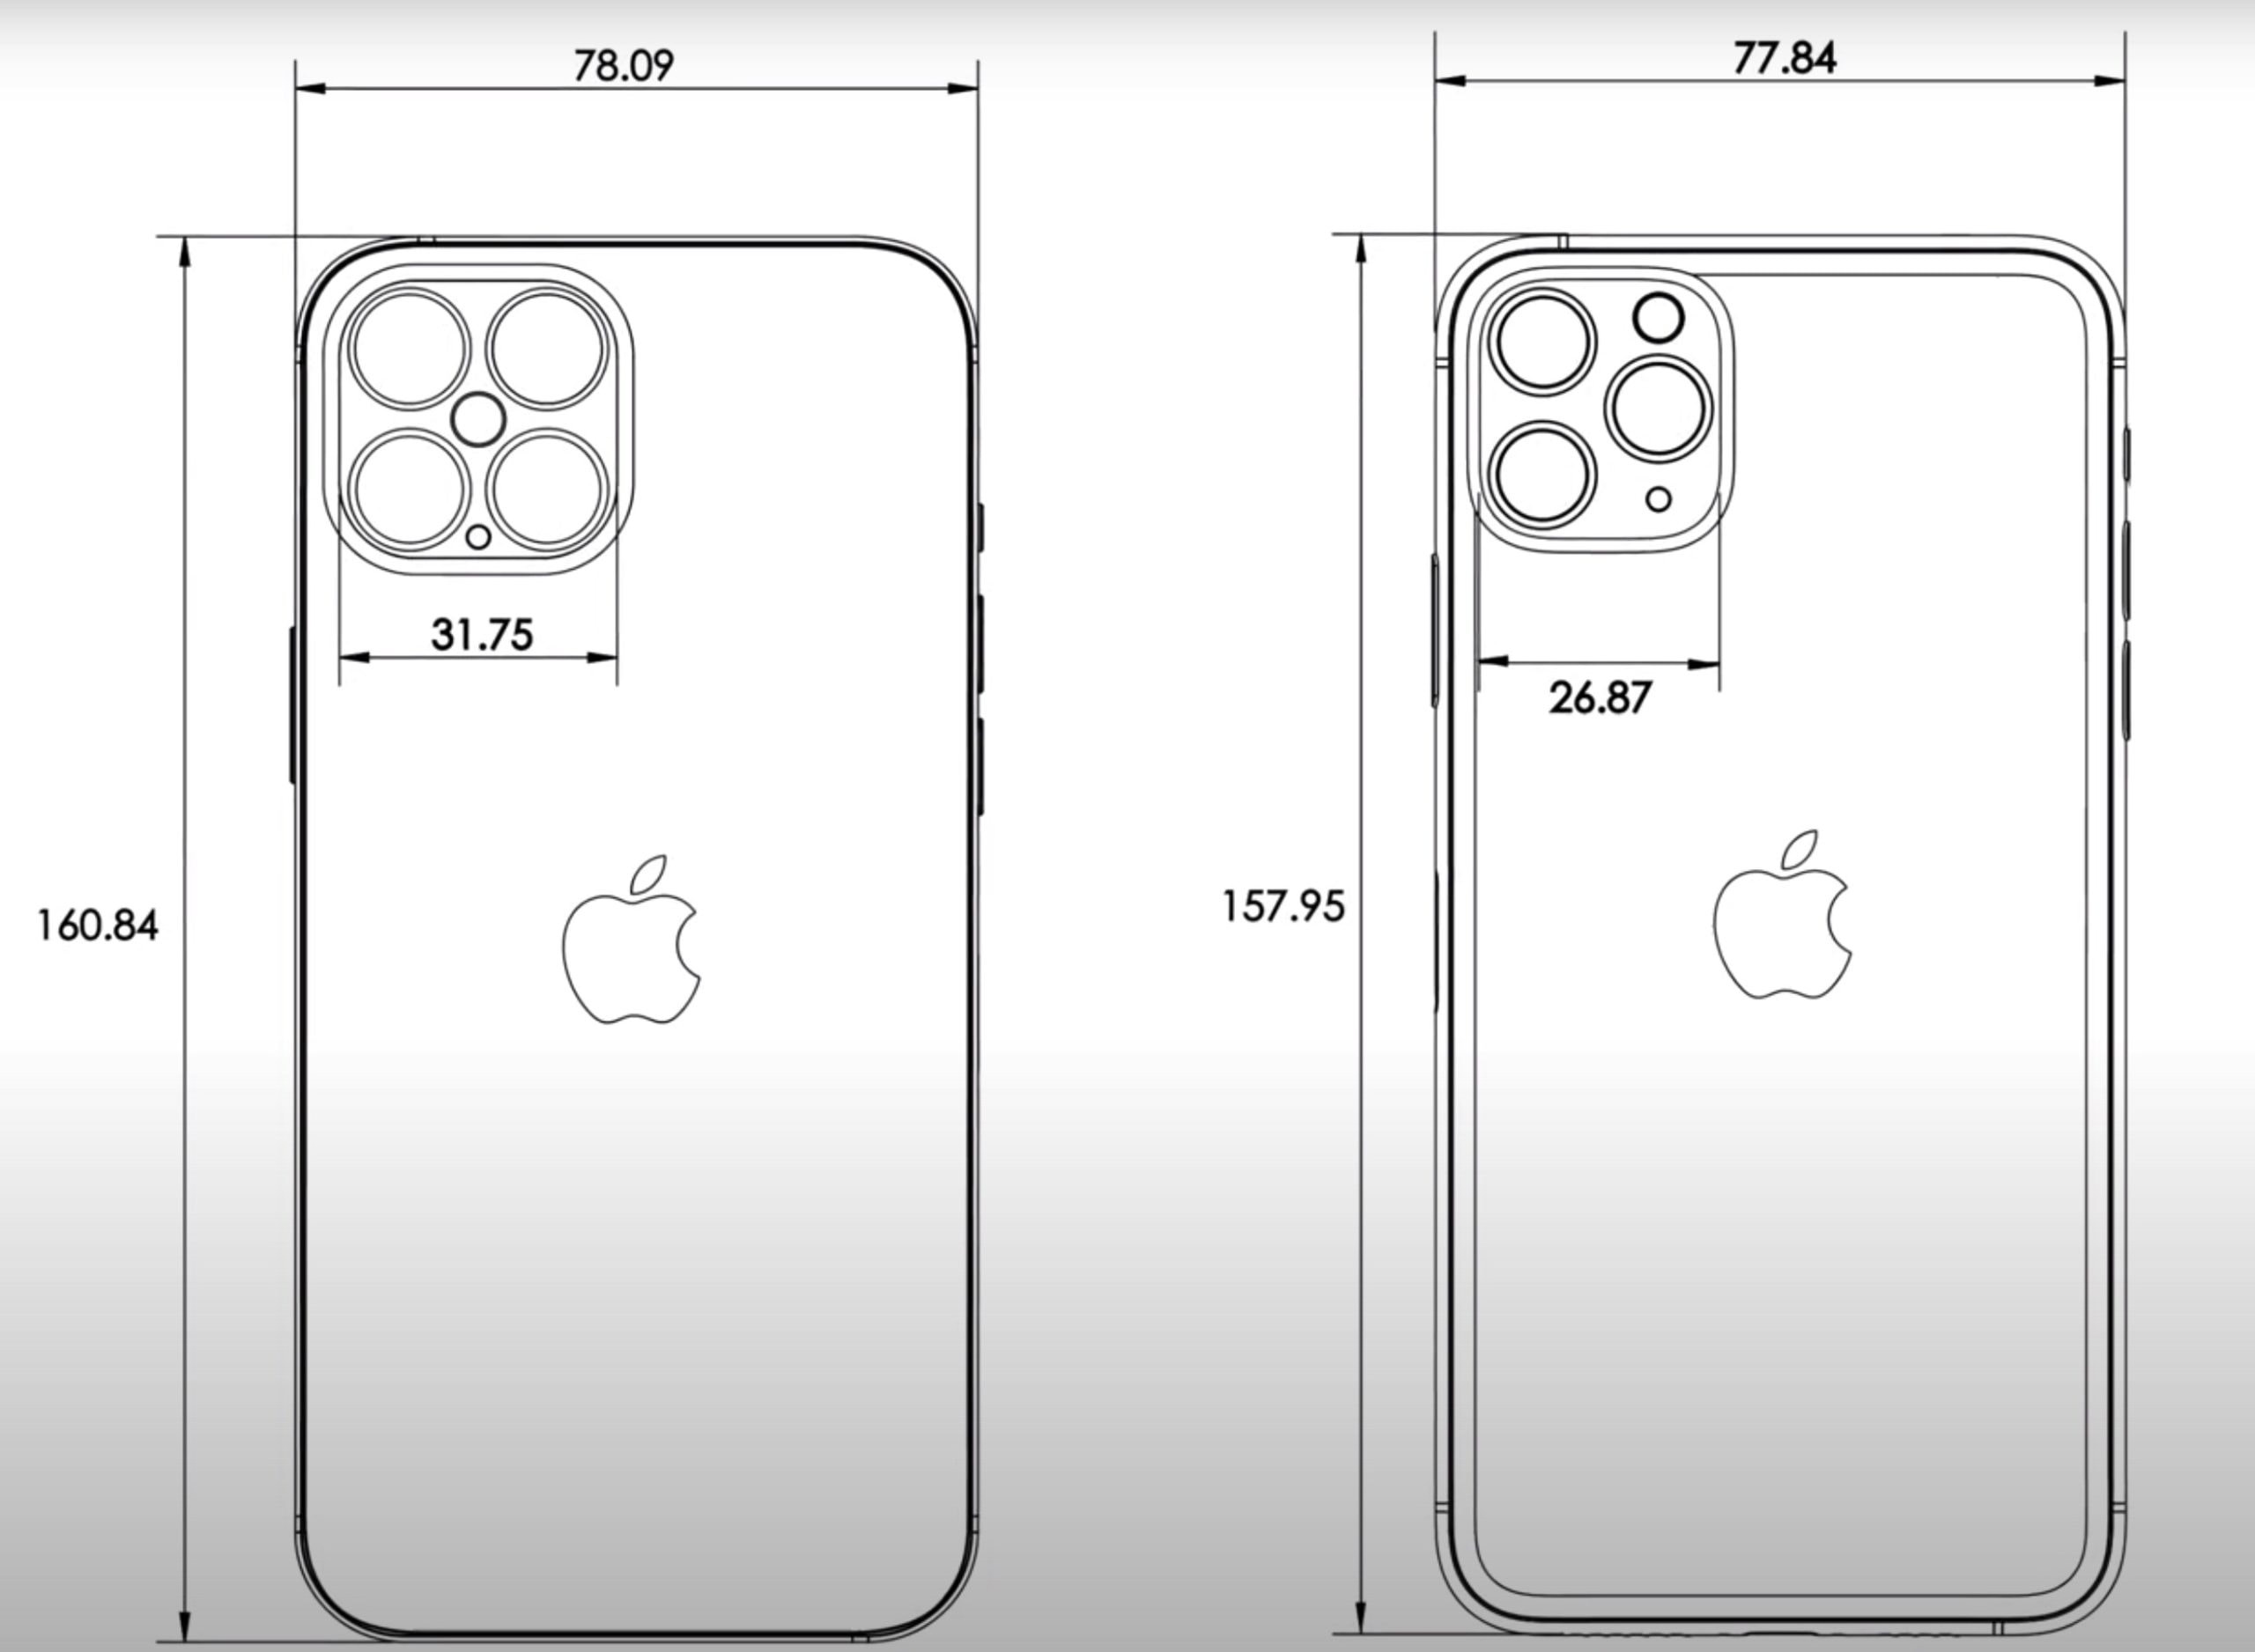 iPhone 12 design secrets supposedly spilled in new